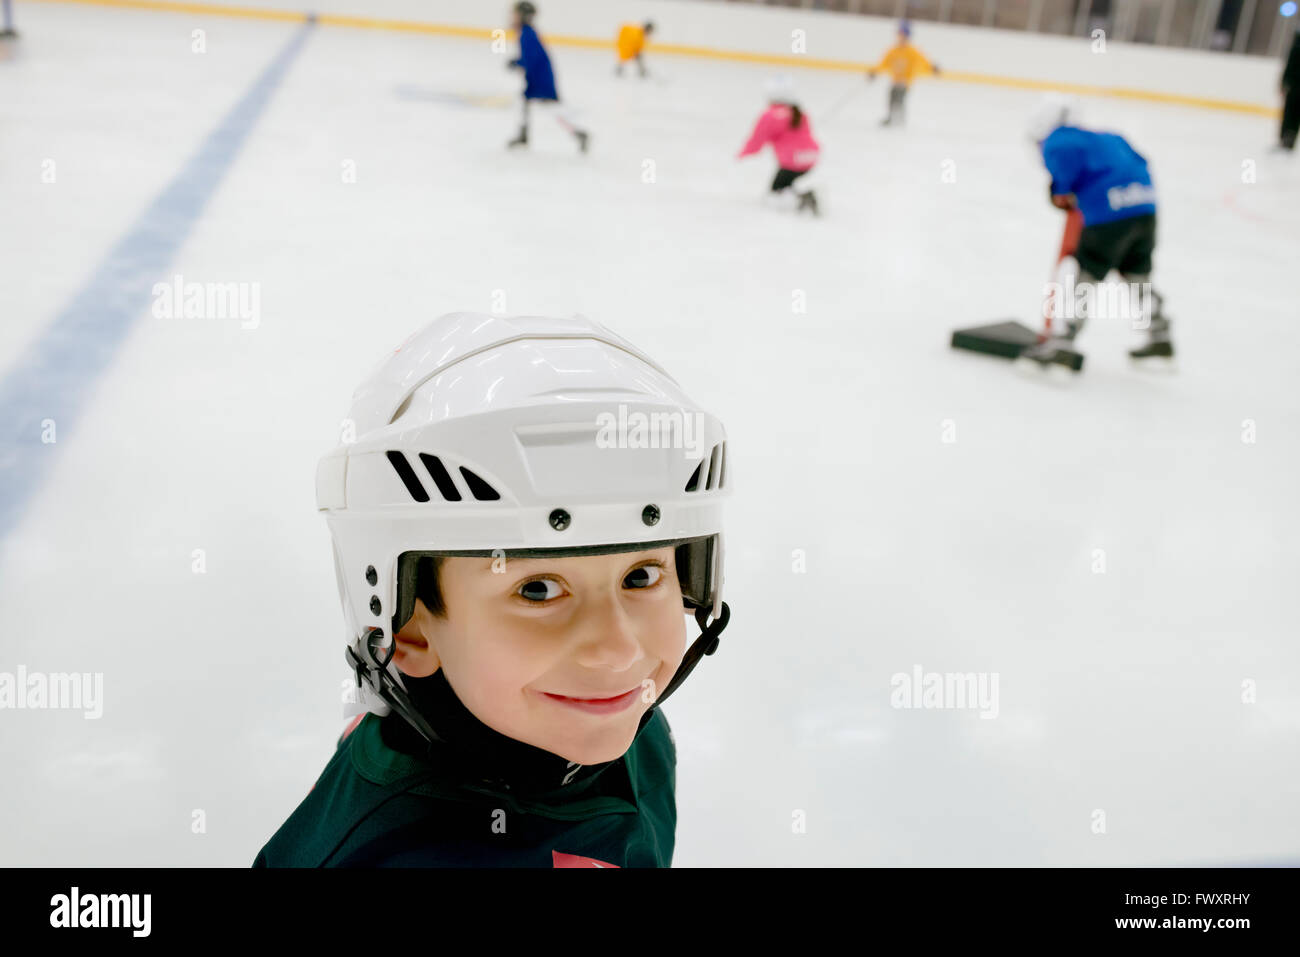 Sweden, Portrait of young male hockey player (4-5) on ice Stock Photo